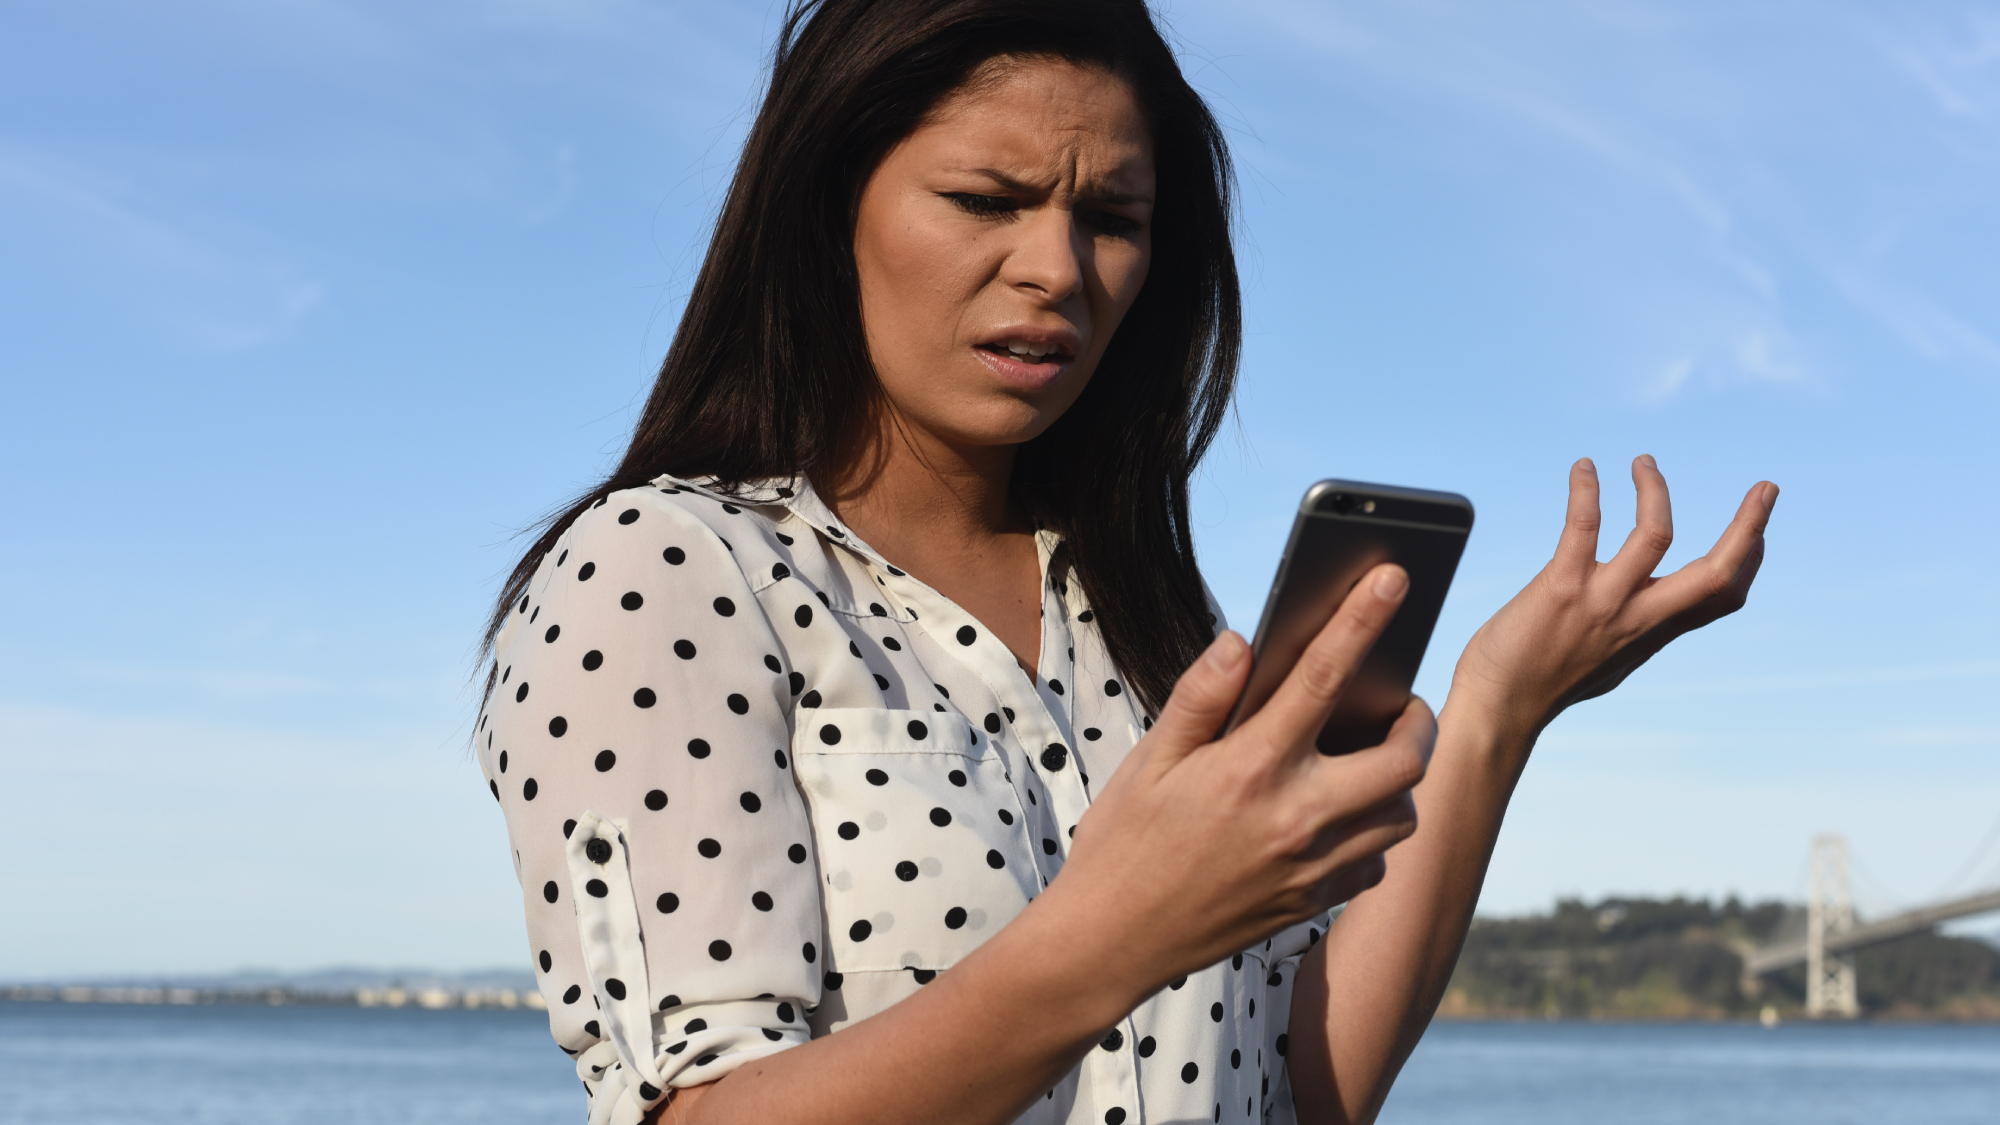 A woman with black hair wearing a white shirt and standing in front of a body of water while looking very confused at her phone.